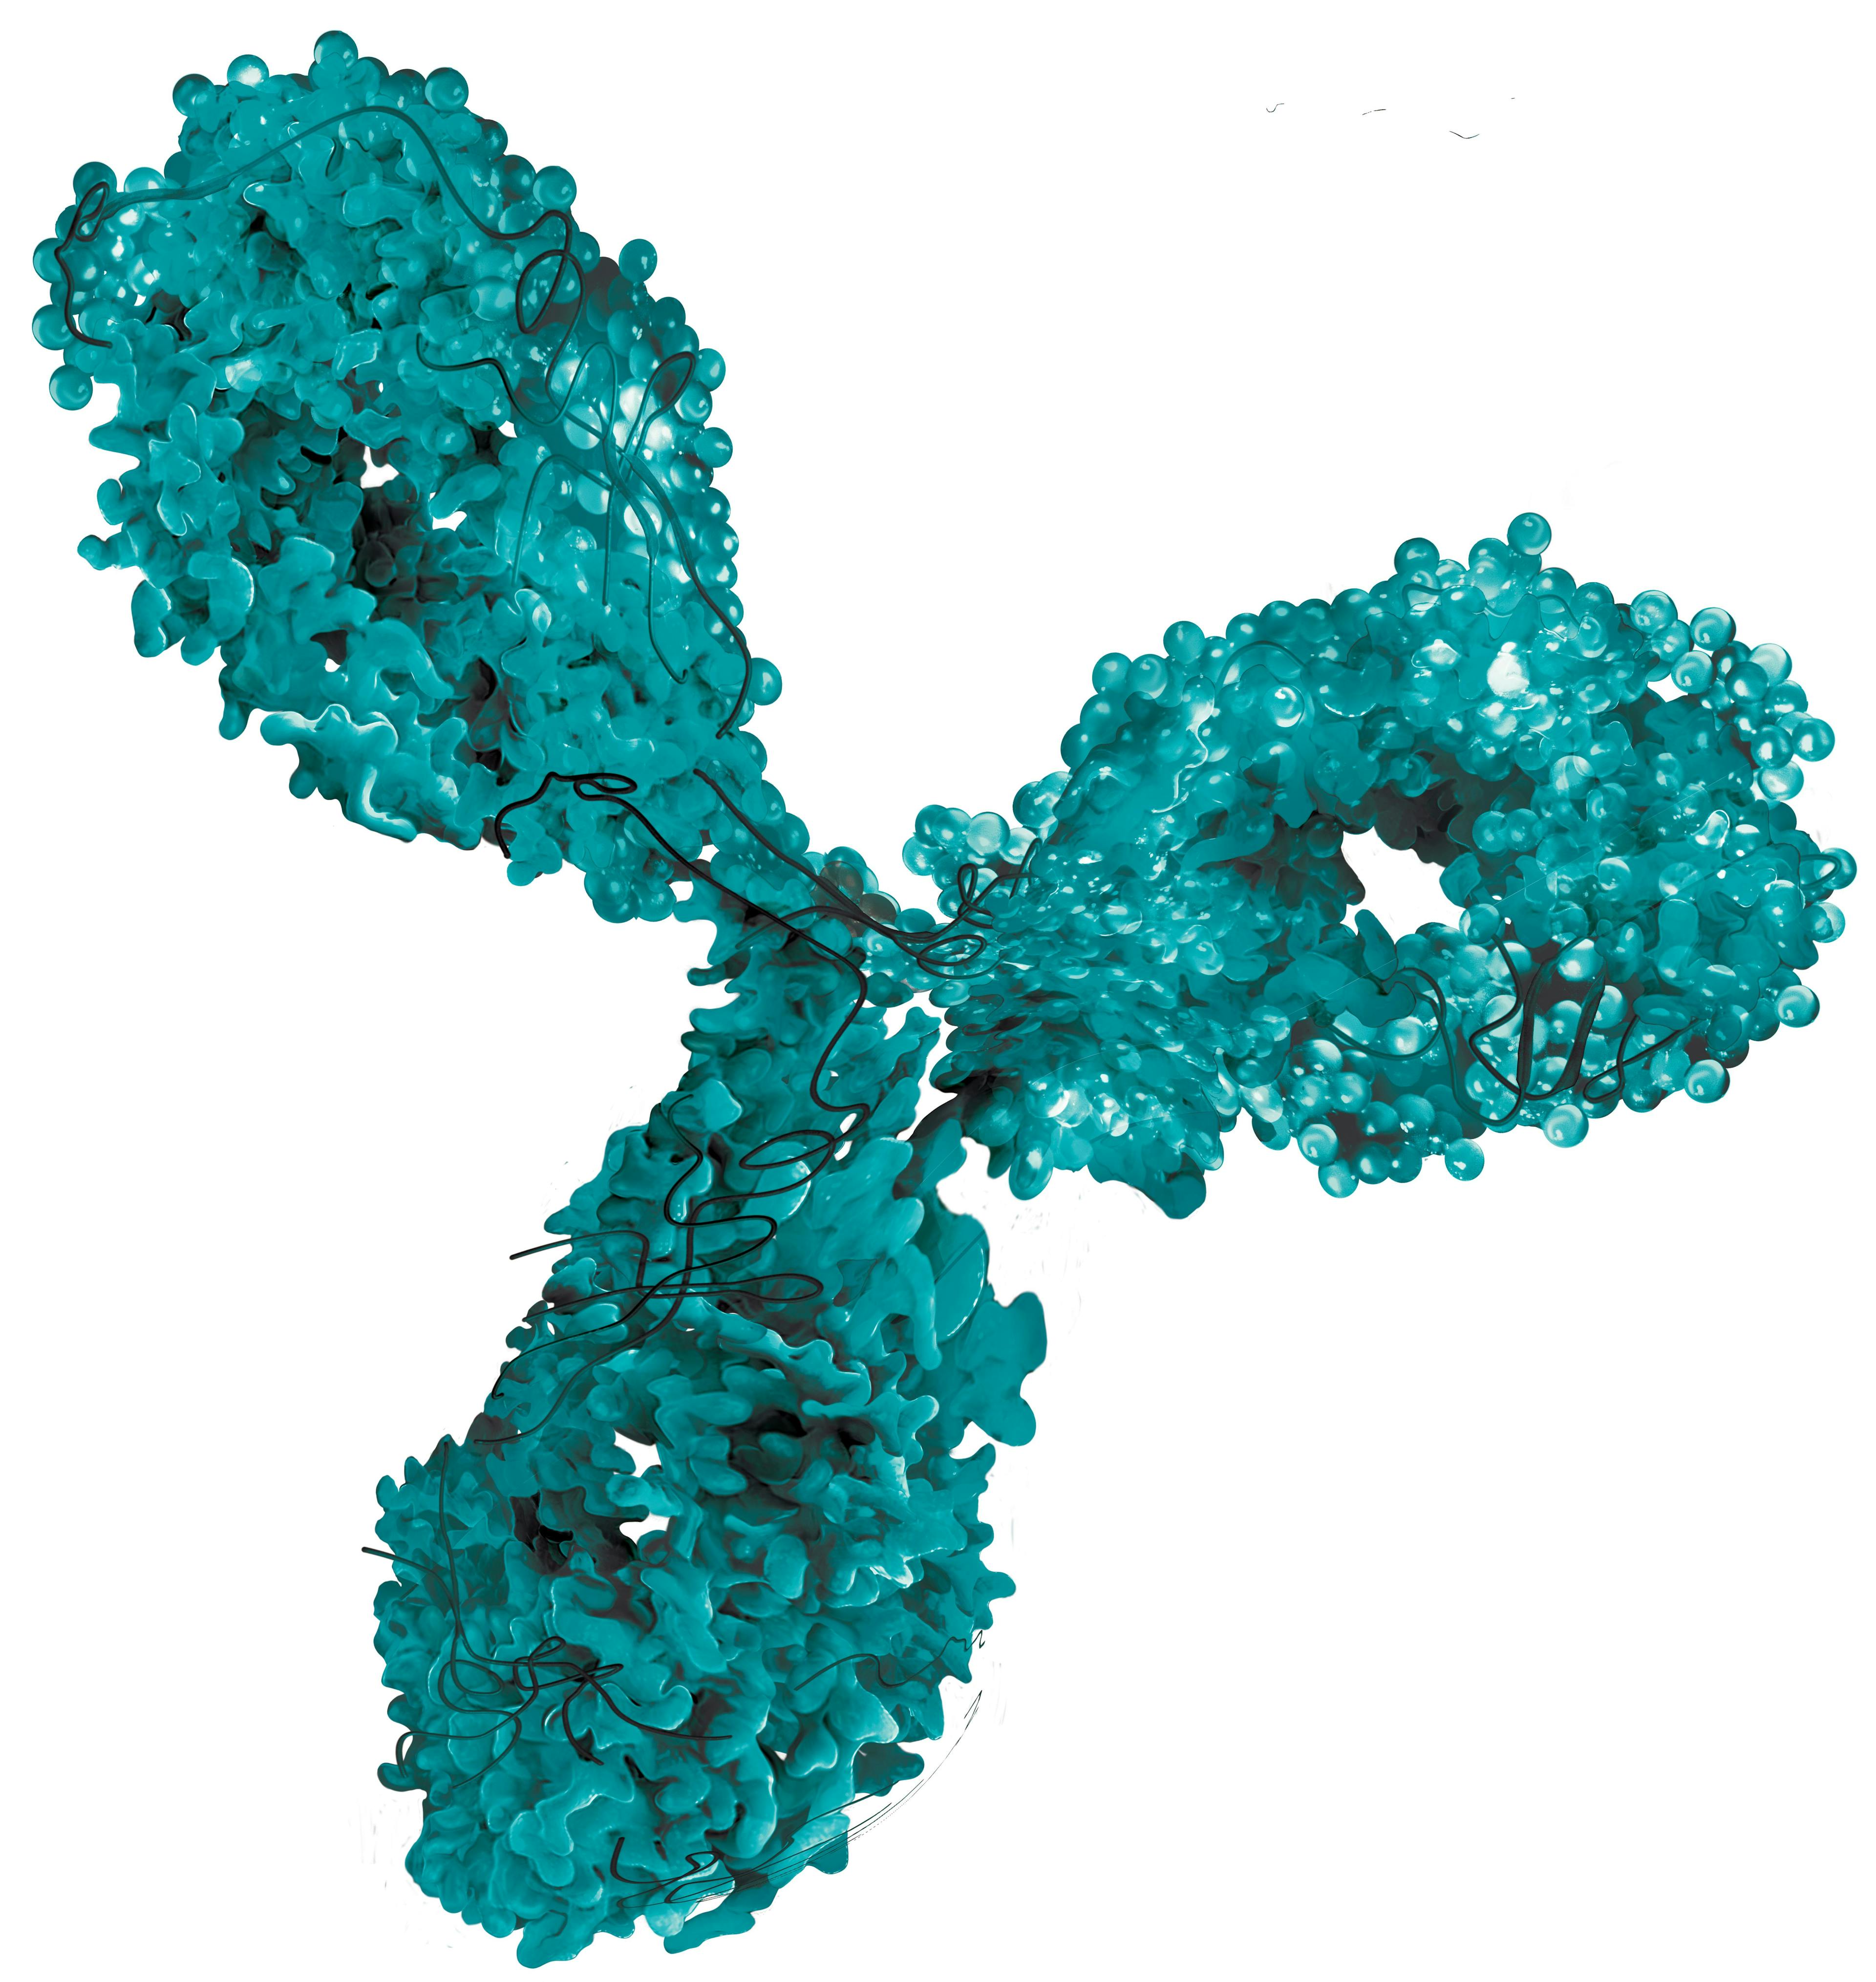 monoclonal antibody blue green 3d rendering isolated on white background | Image Credit: © Mirror-images - stock.adobe.com